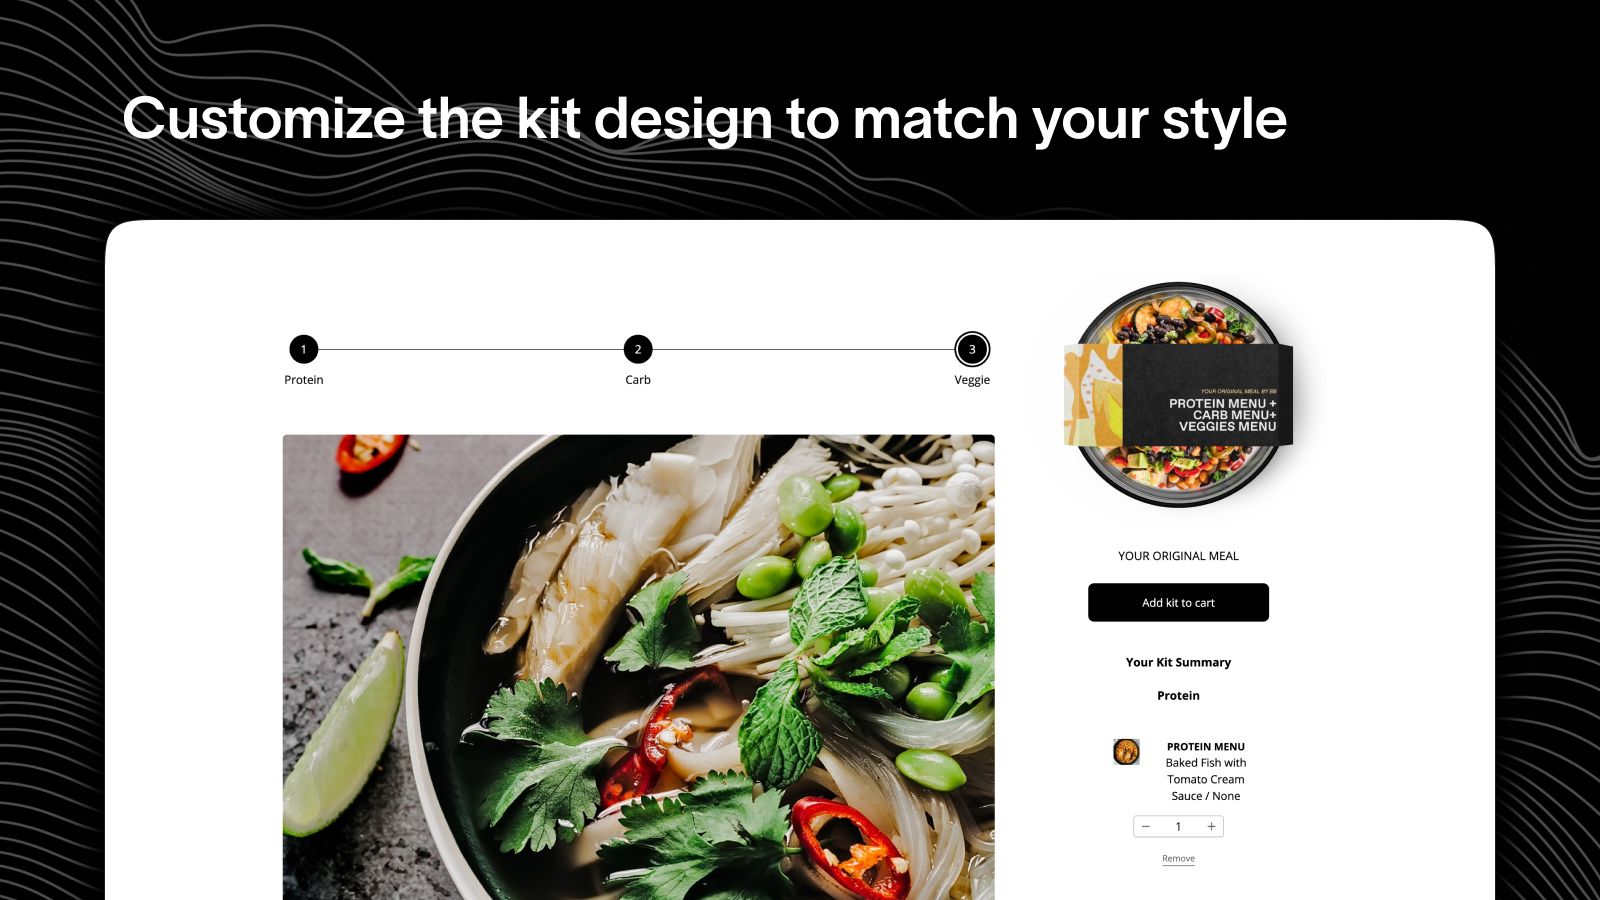 Customize kit design to match your style